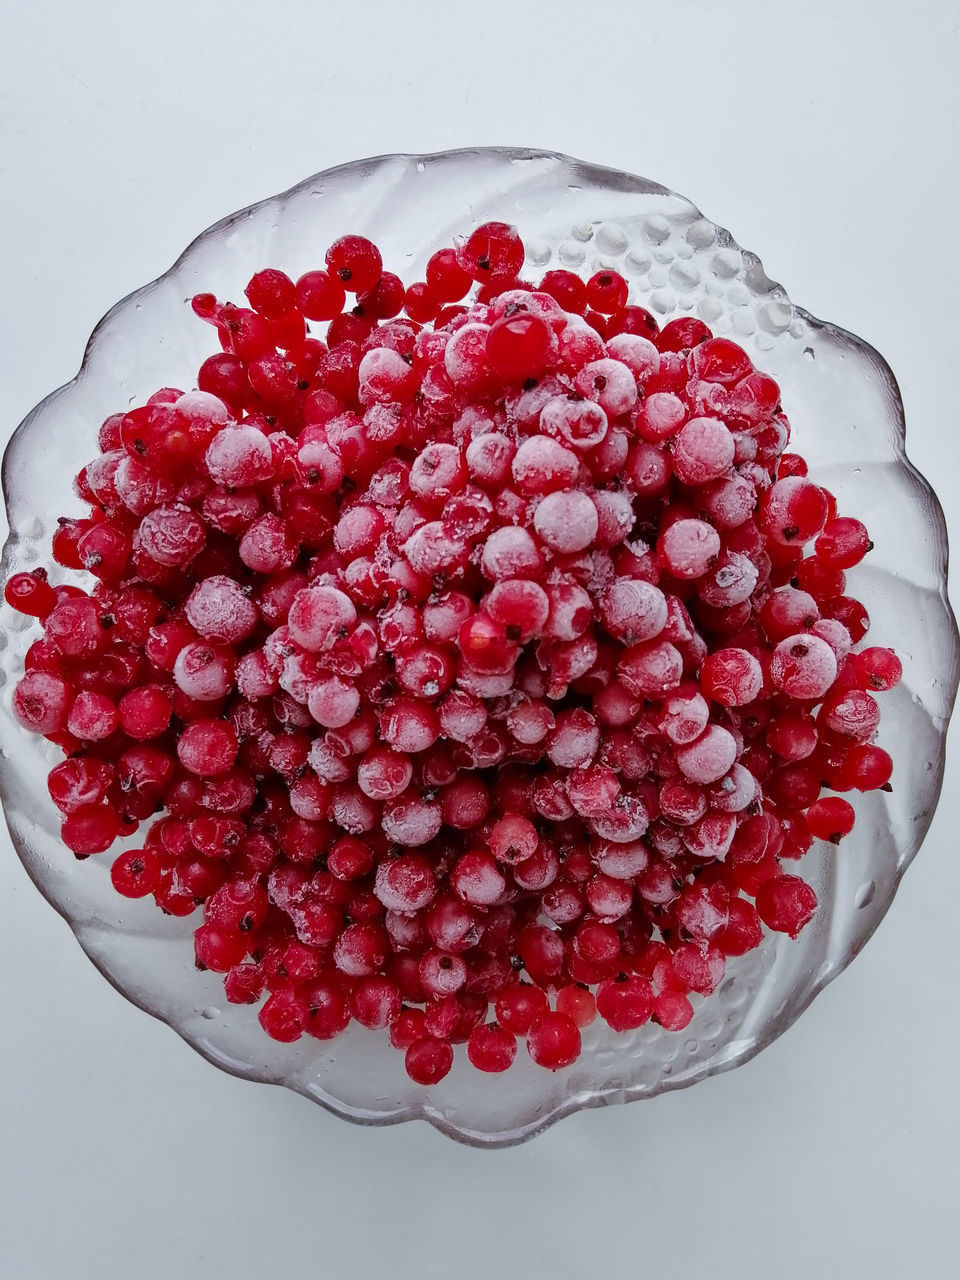 HIGH ANGLE VIEW OF RED BERRIES